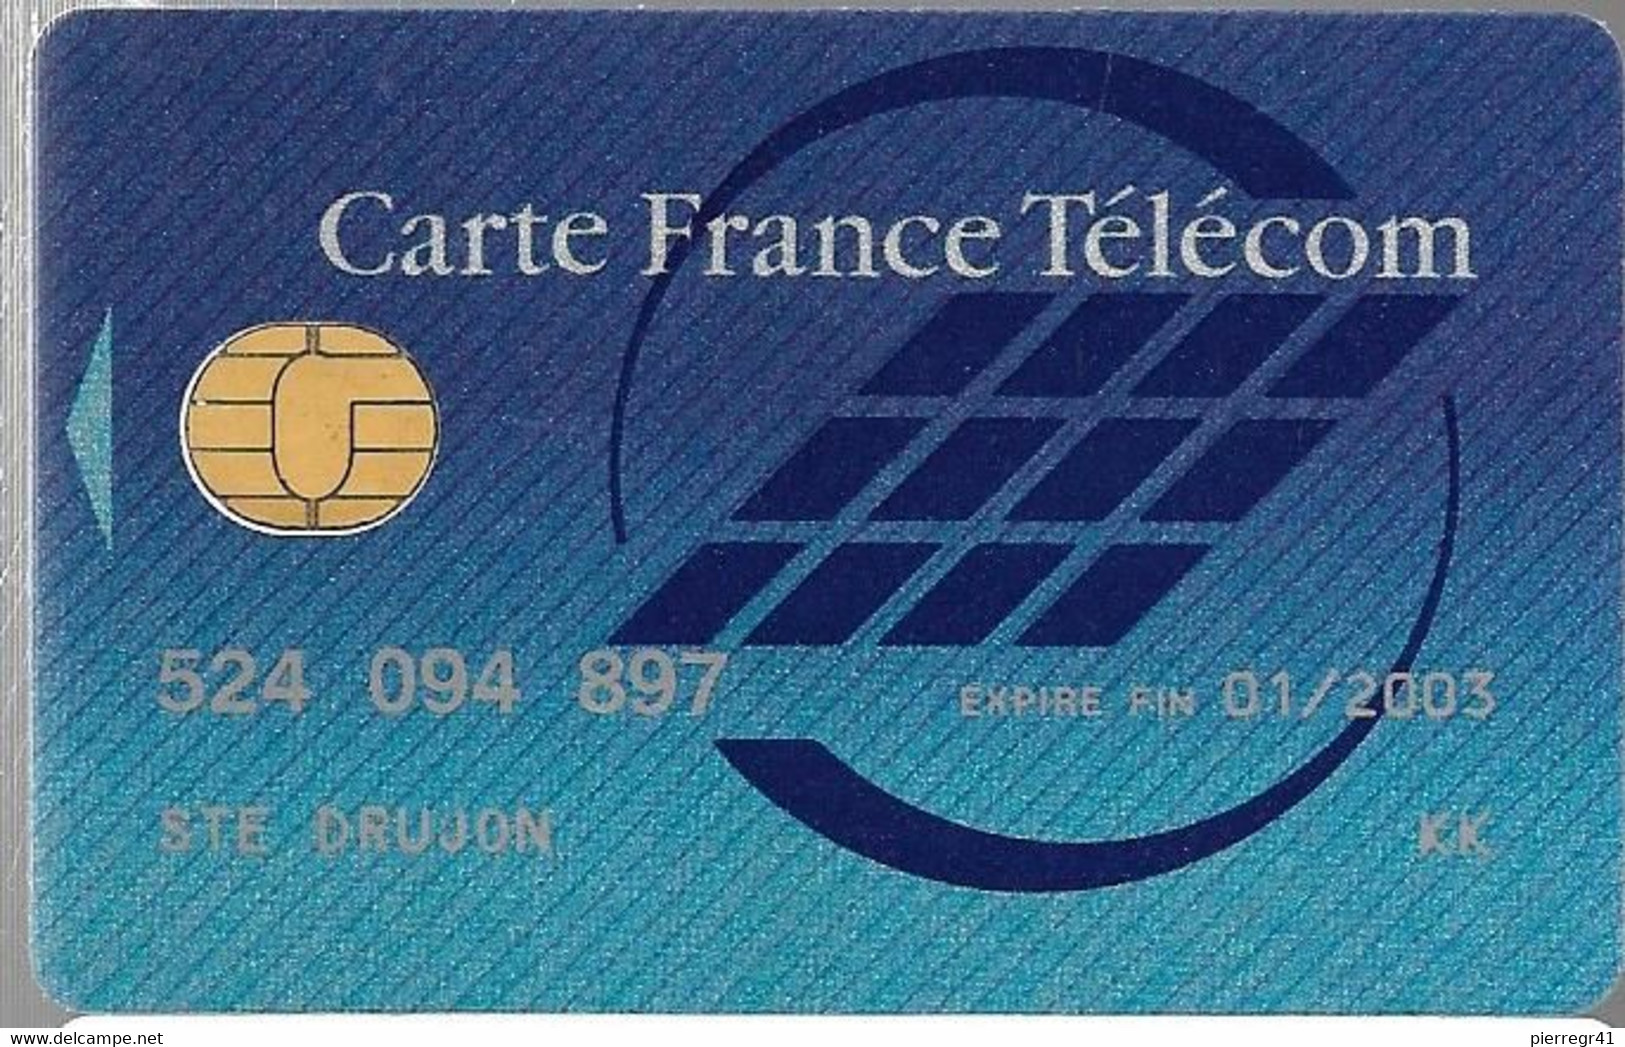 1-CARTE FRANCE TELECOM-PUCE SOL C-NATIONALE-Exp01/2003-TBE - Tipo Pastel